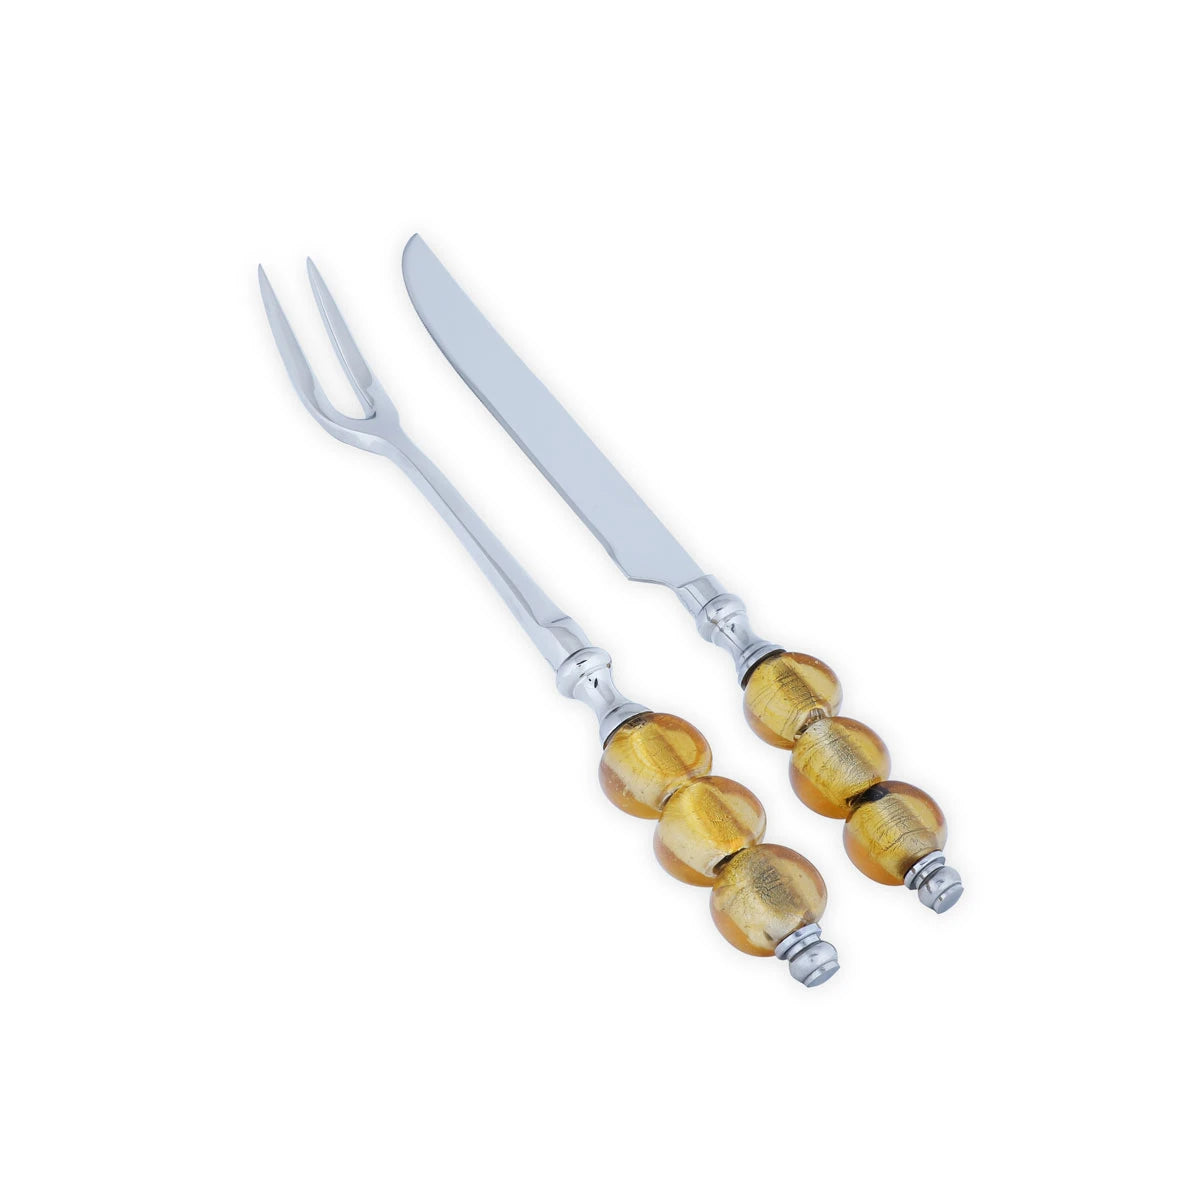 2-Piece Brass Metal Carving Set with Large Beaded Handles